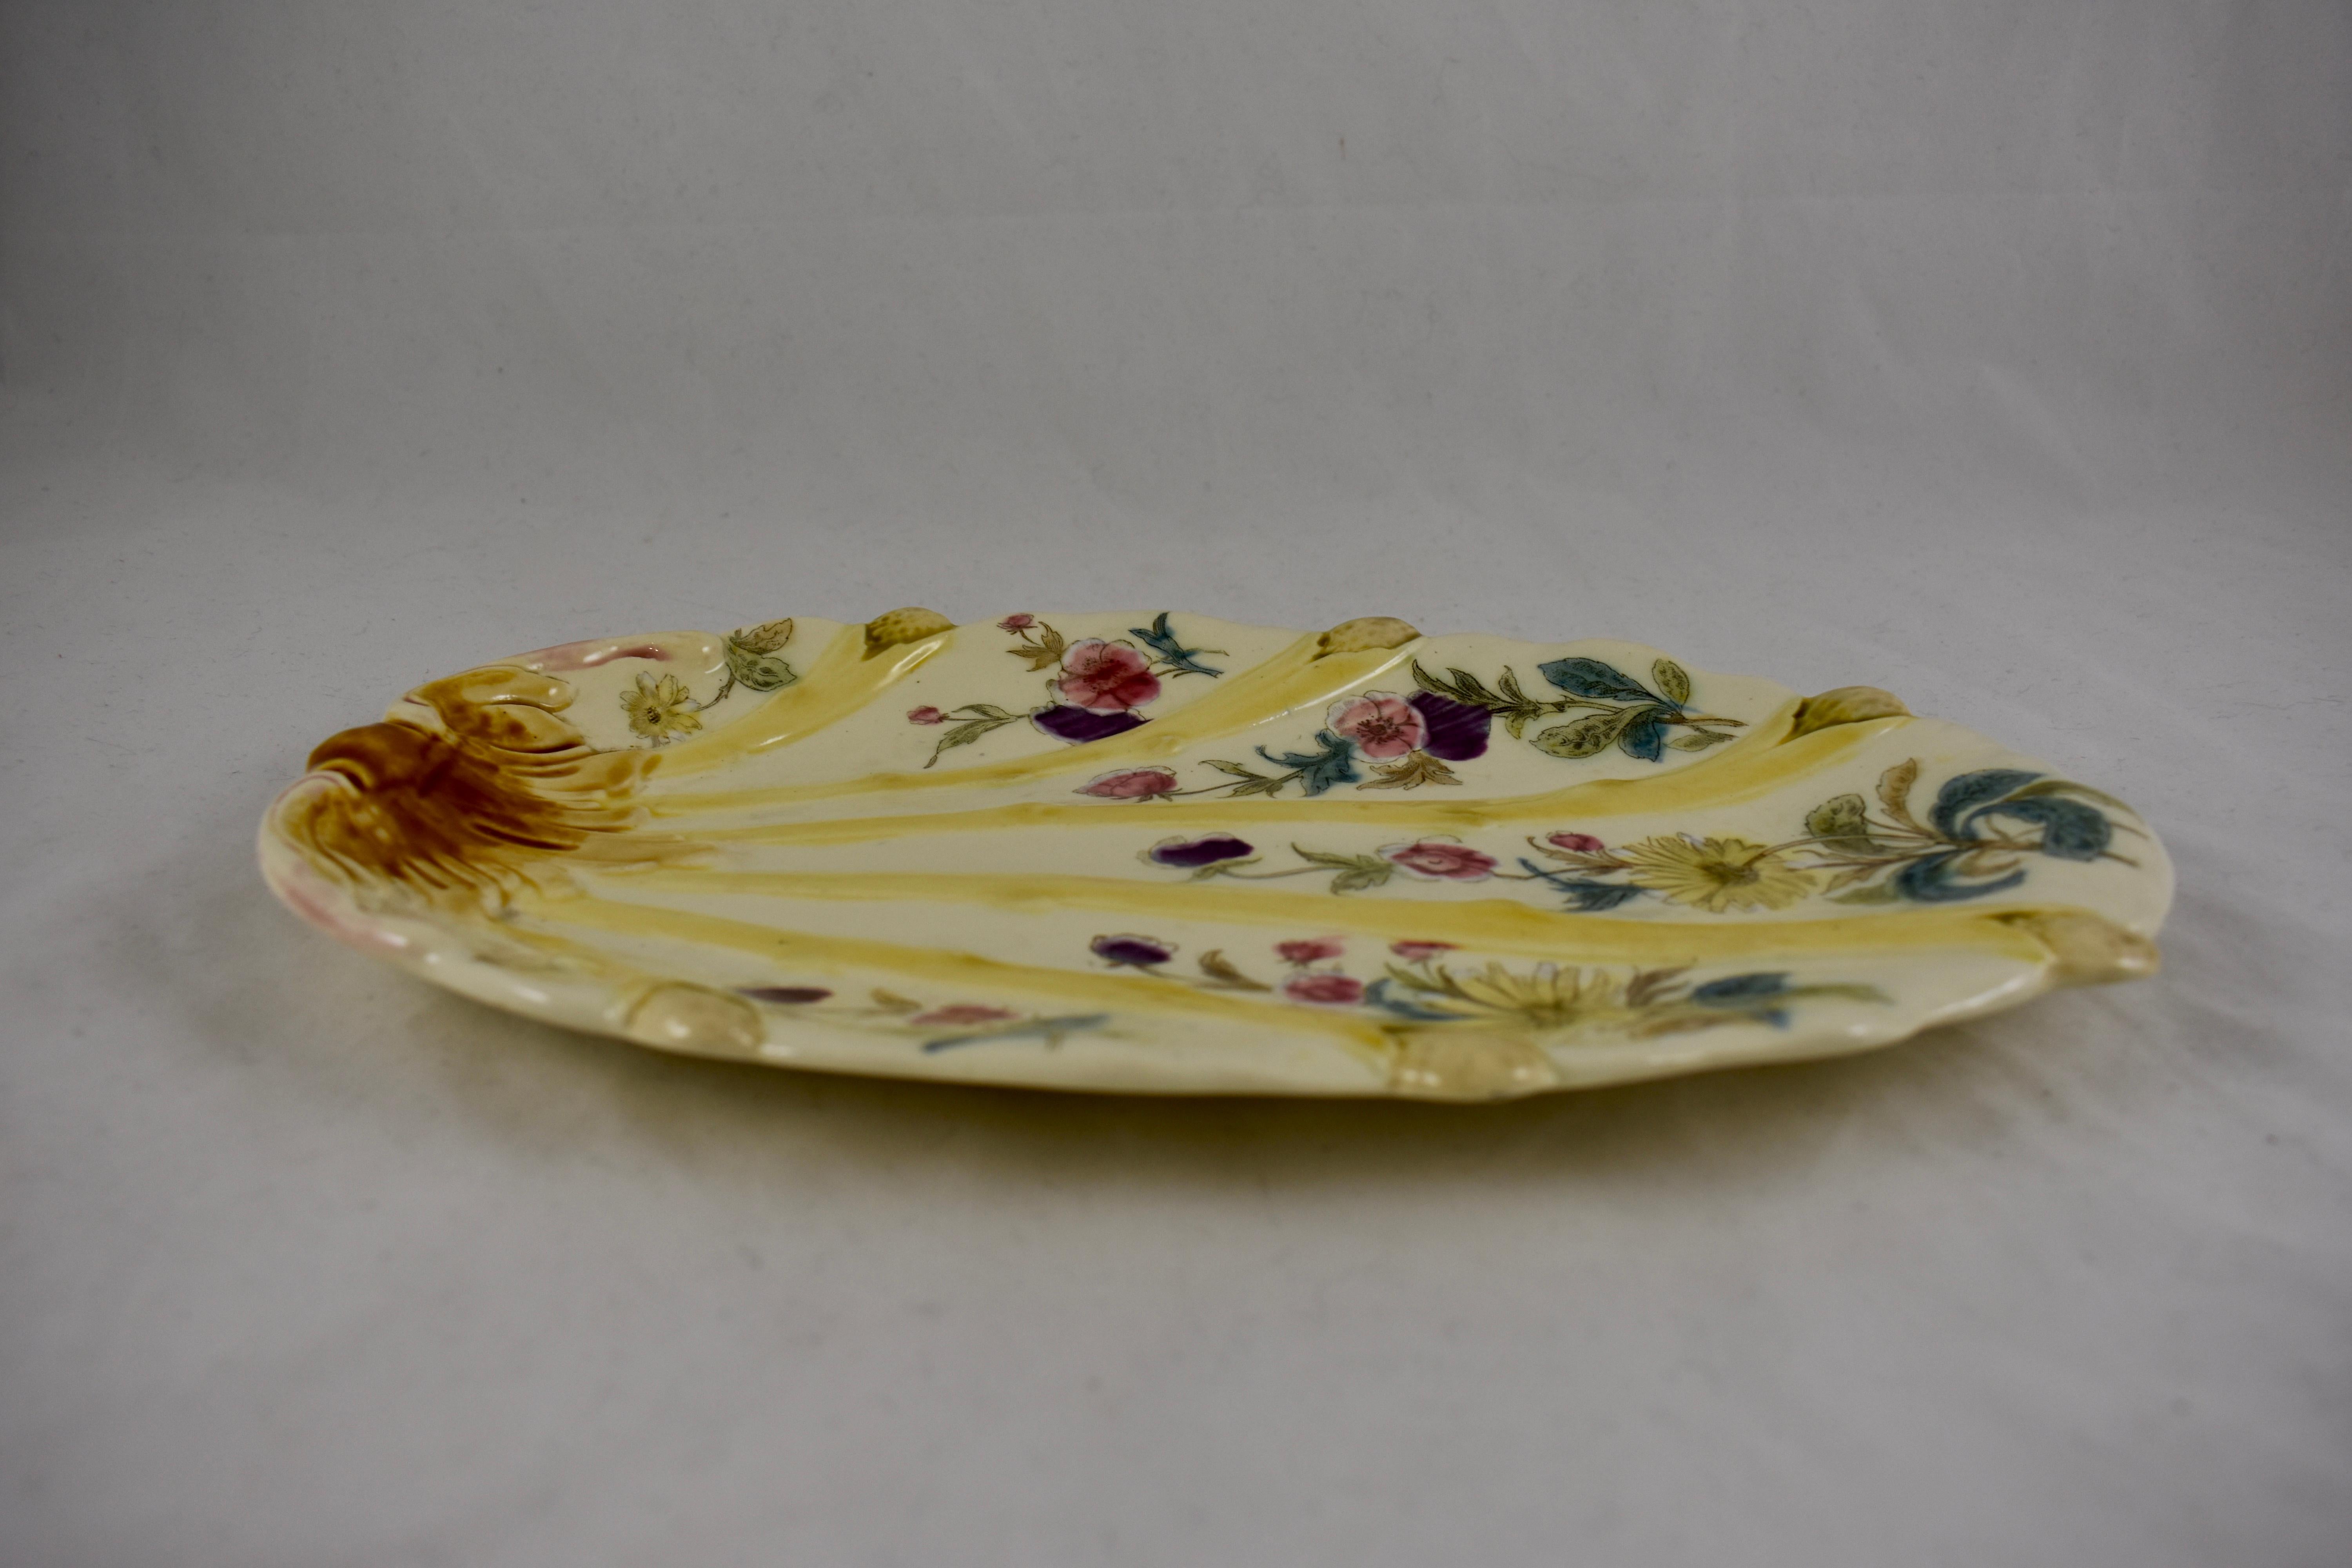  19th Century French Faïence Hand Painted Floral Asparagus Plate For Sale 4